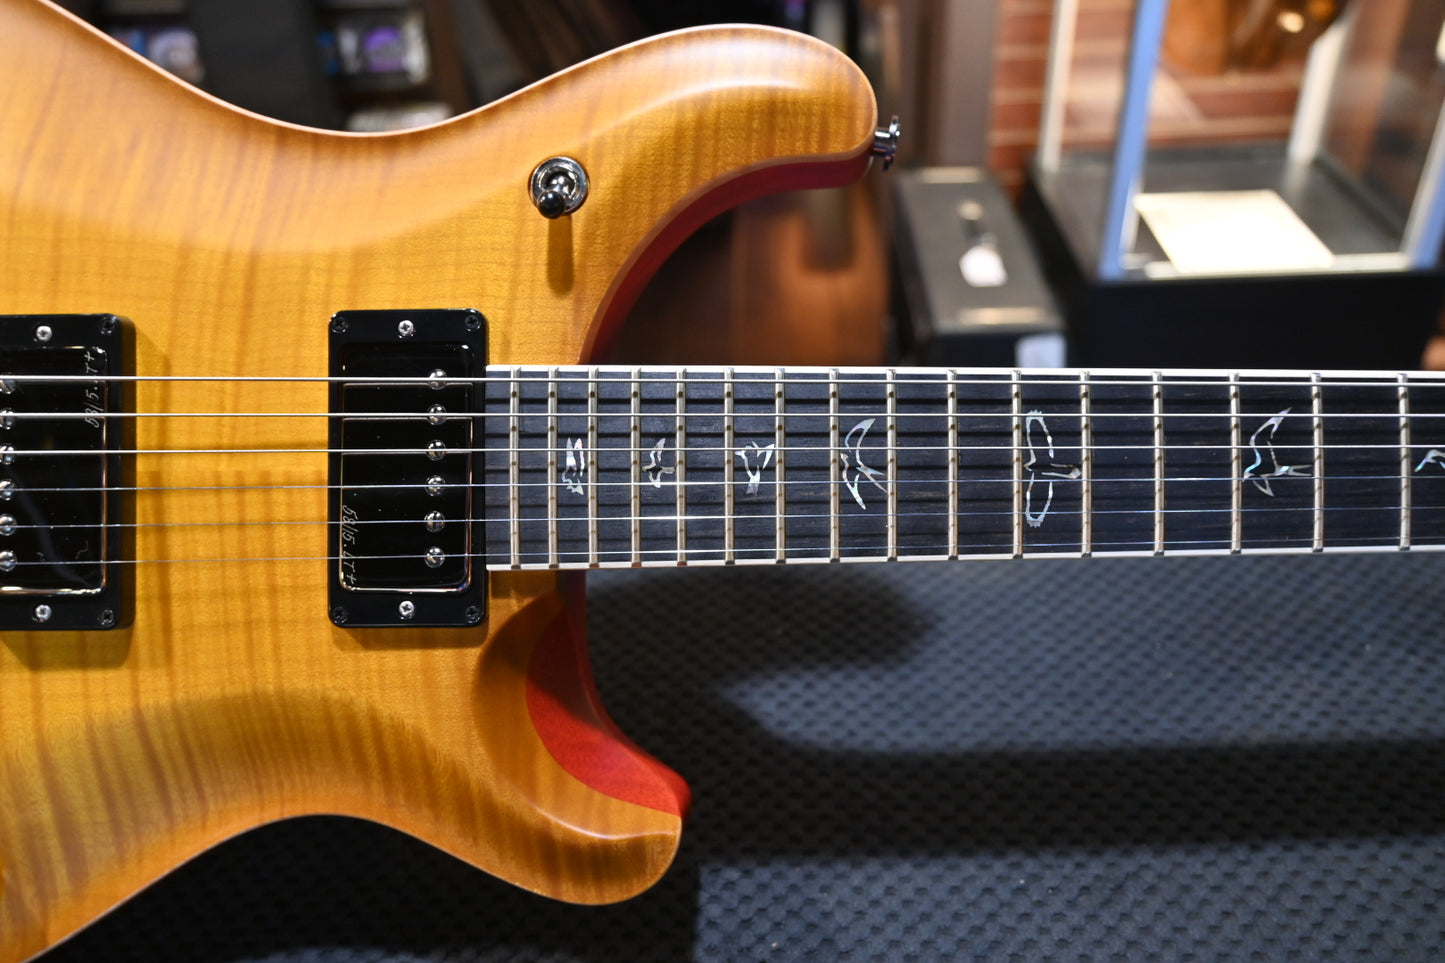 PRS Wood Library McCarty 594 Korina Back and Neck - Faded McCarty Sunburst Satin Guitar #9579 - Danville Music